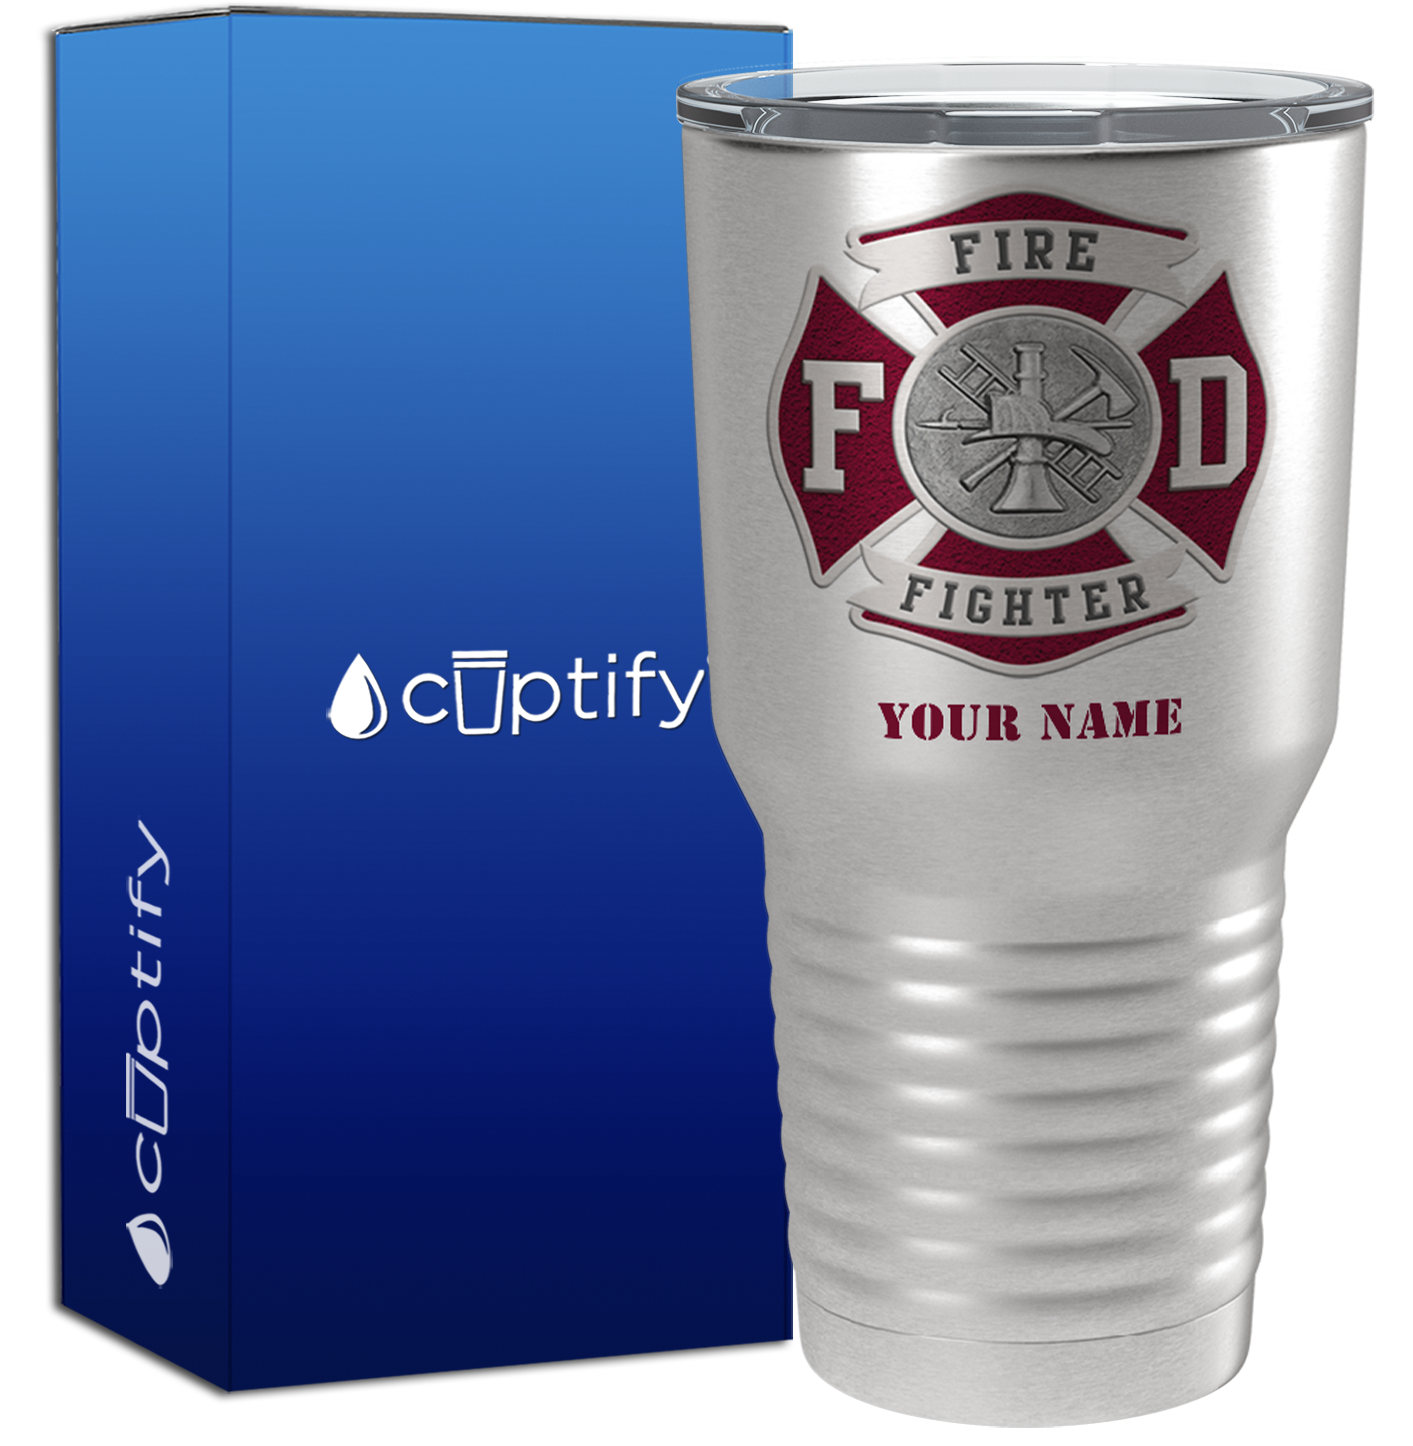 Personalized Red Fire Department Badge on Stainless 30oz Firefighter Tumbler